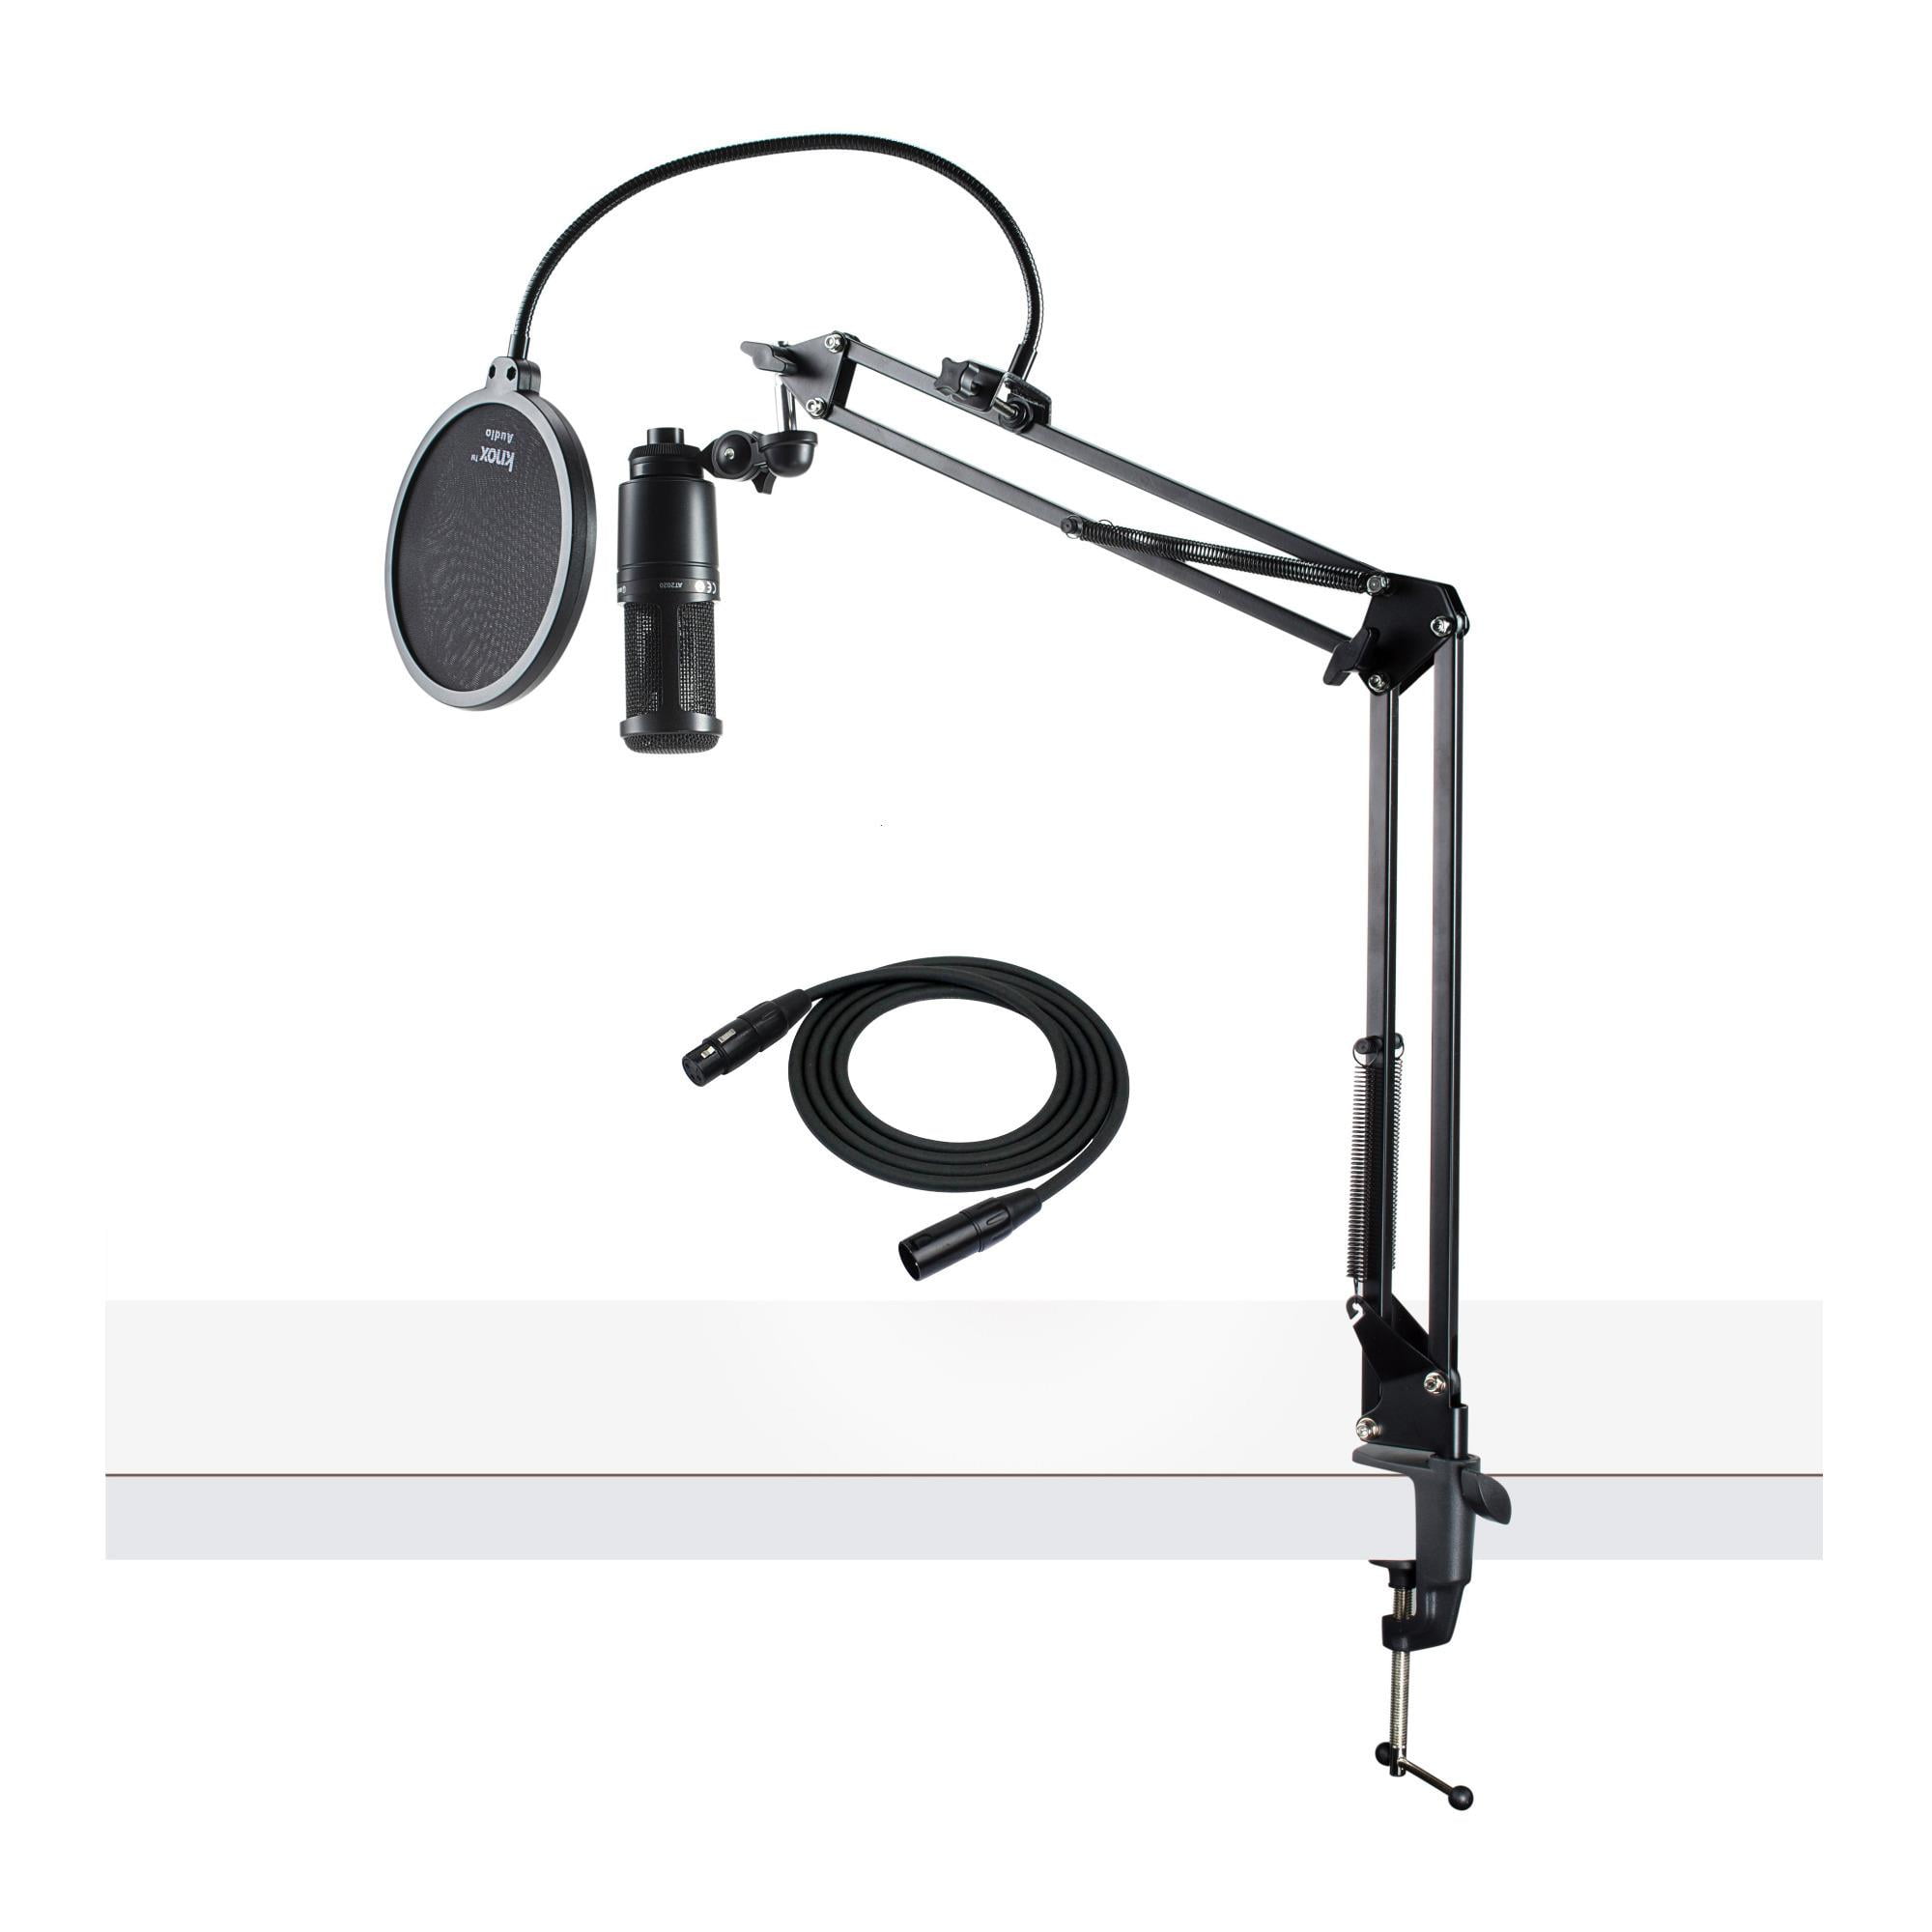 Audio-Technica AT2020USB-X Cardioid Condenser USB Microphone with  Microphone Arm + Wind Screen Pop Filter + Cleaning Cloth (4 Items)